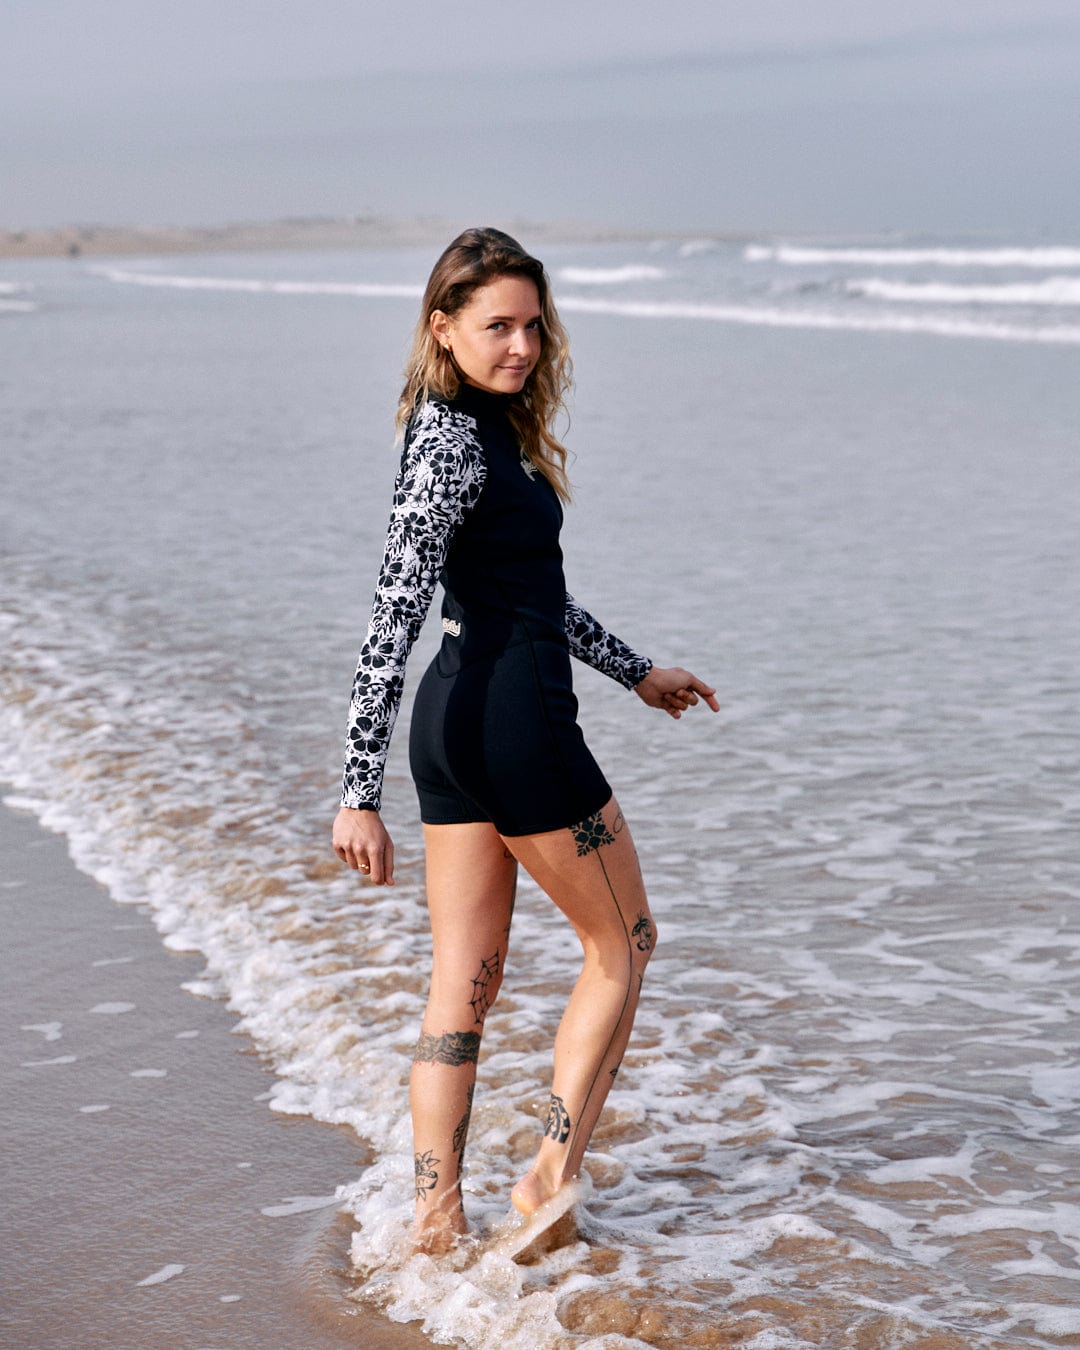 A woman in a Hibiscus - Womens Shortie Wetsuit - Black by Saltrock standing on a sandy beach with gentle waves at her feet.